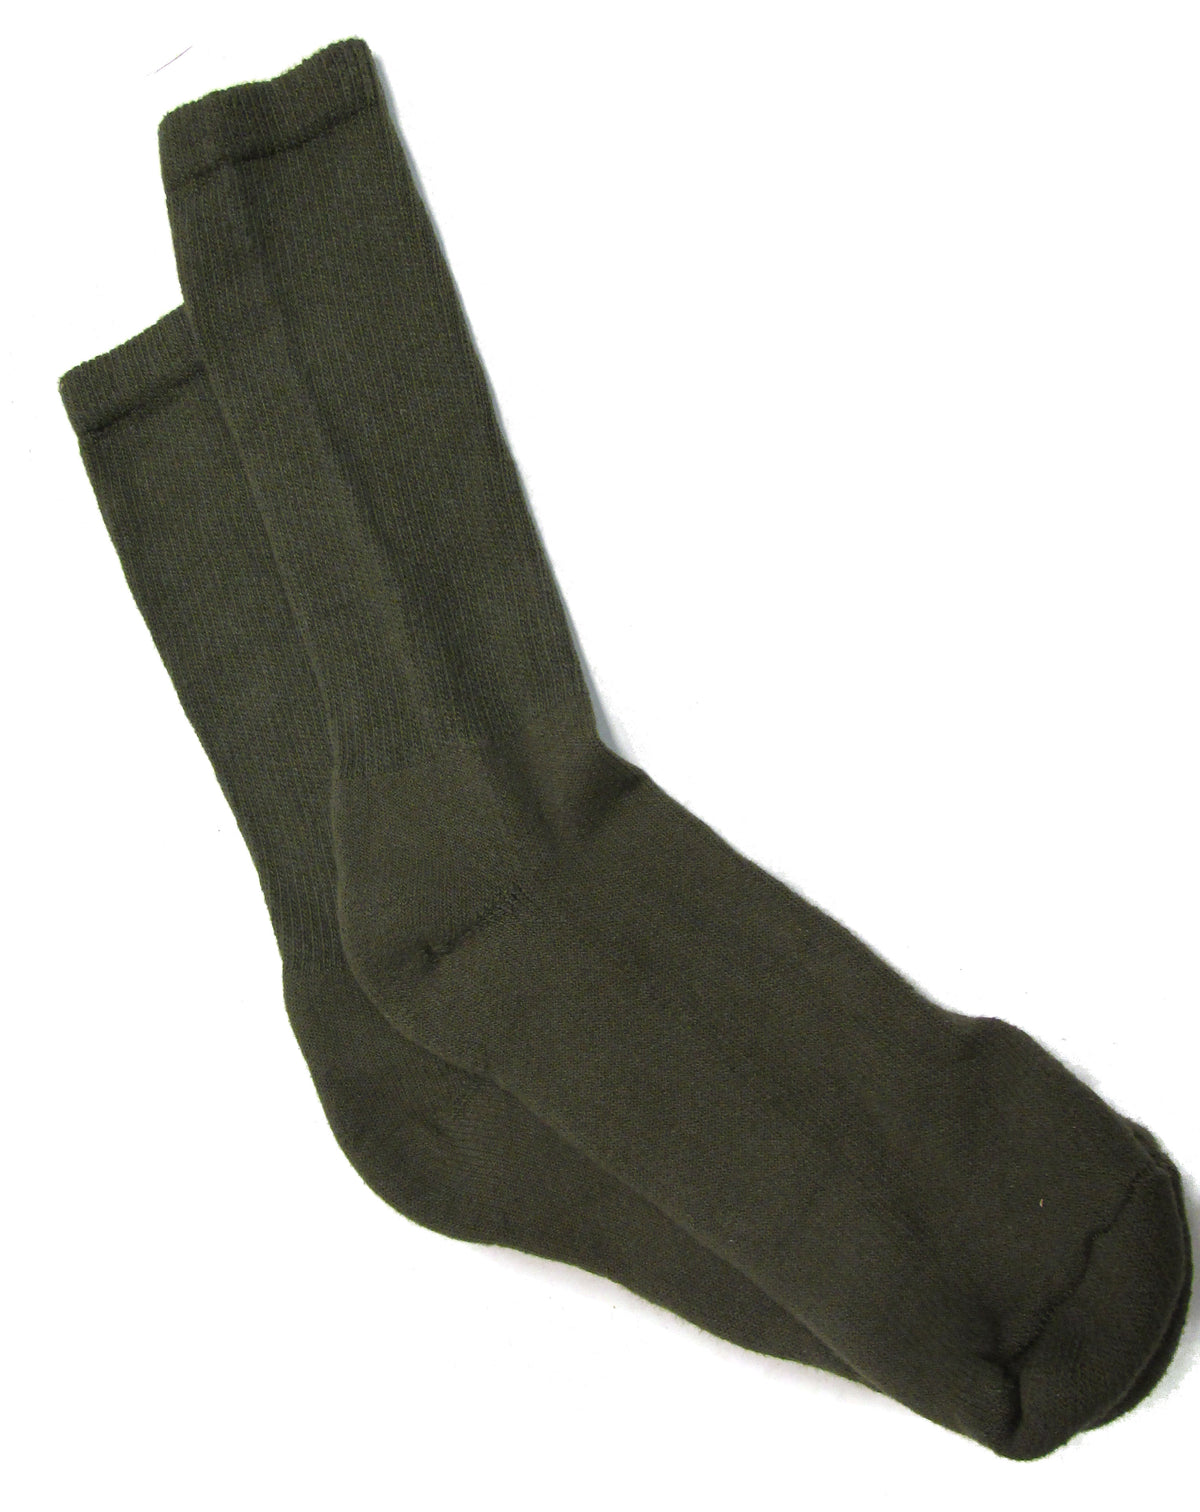 Military Style Men's Anti-Microbial Boot Socks